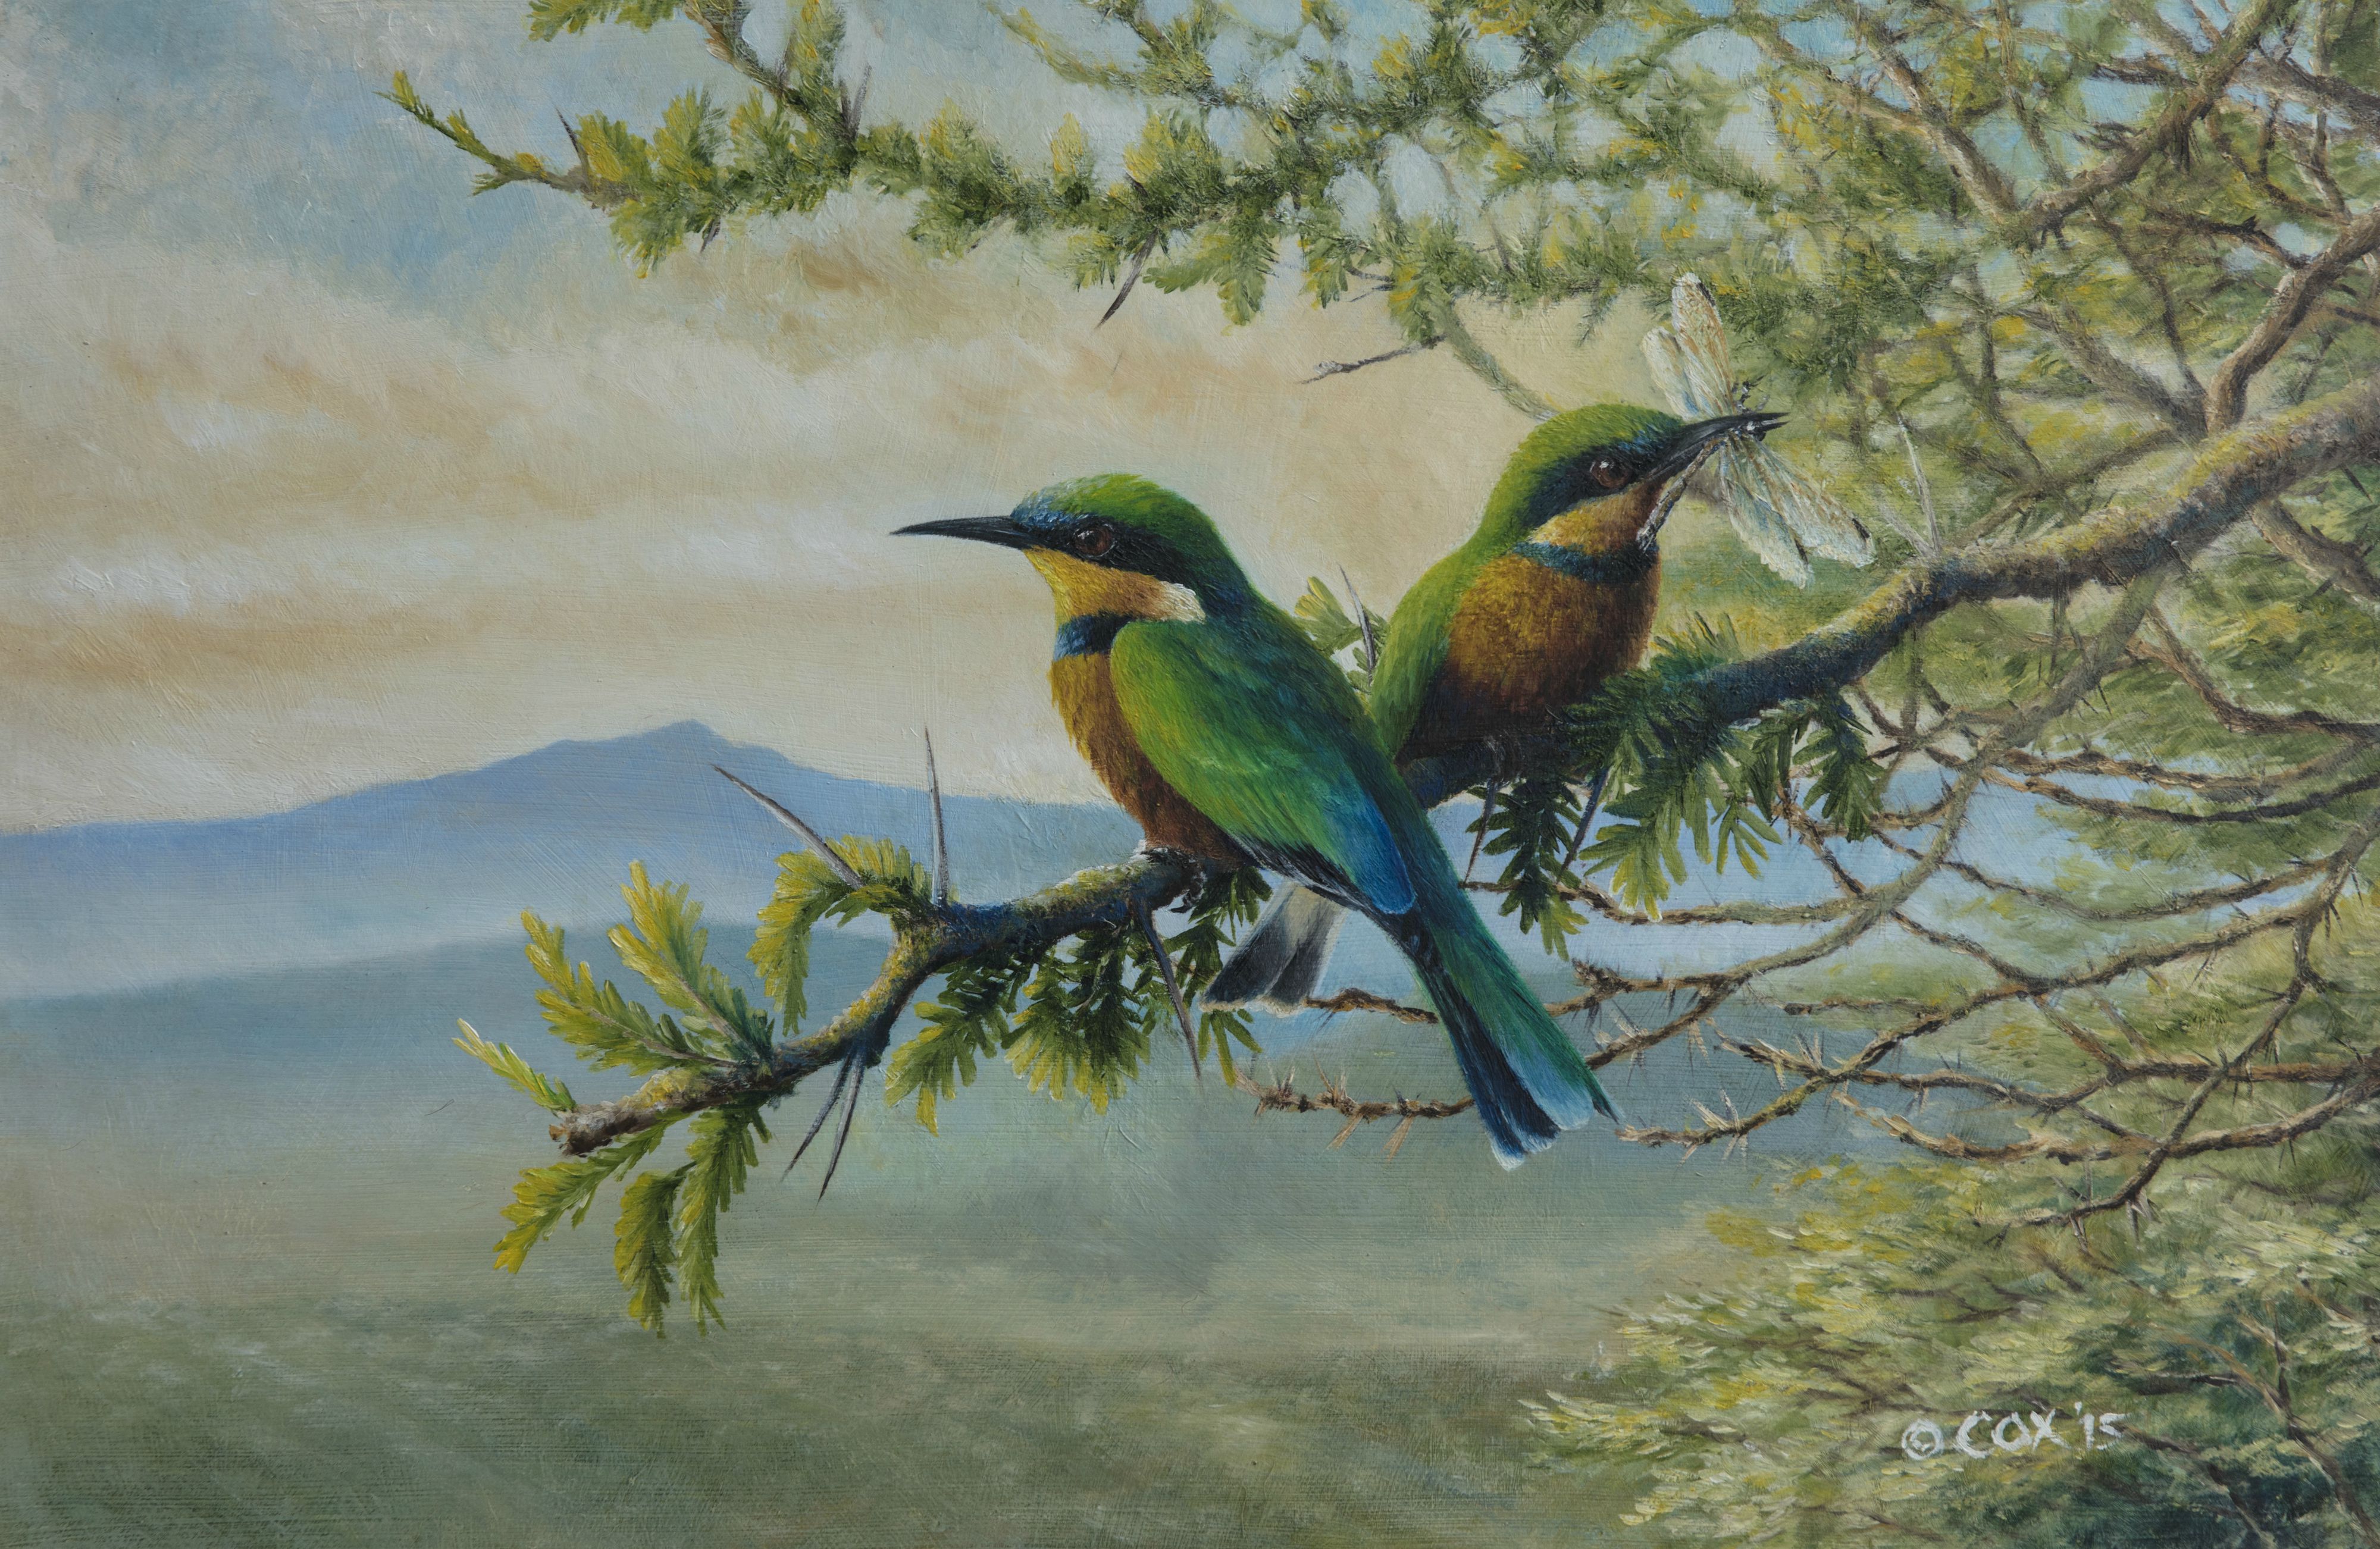 Cinnamon-chested Bee-eaters at the Great Rift Valley, Oil on panelboard, 24x18"